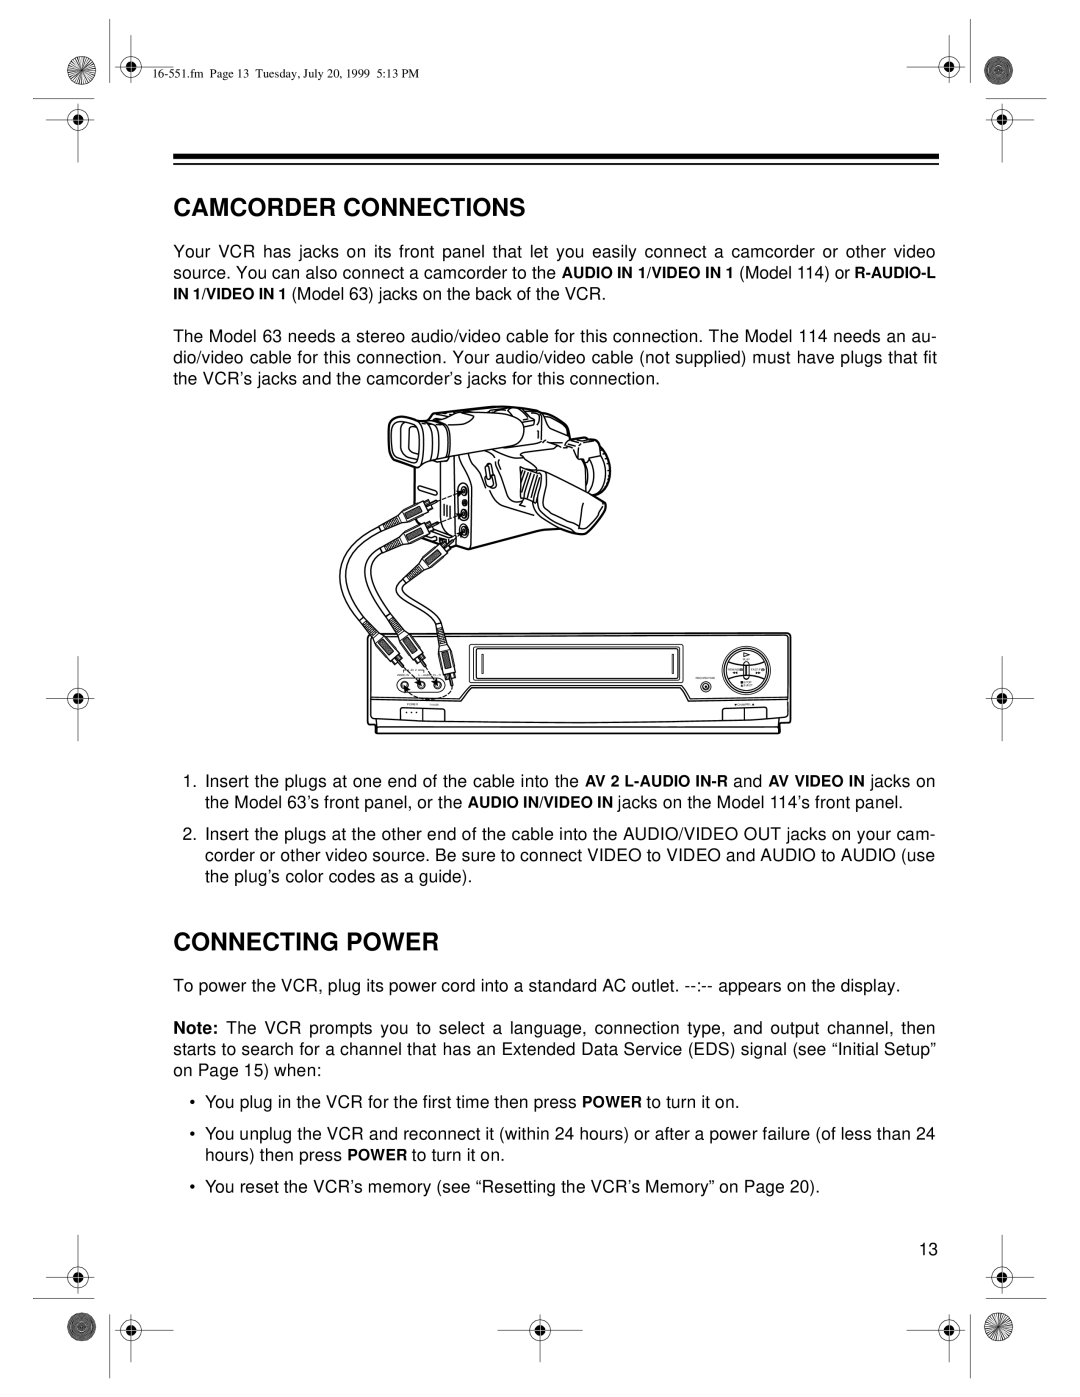 Optimus 114, 63 owner manual Camcorder Connections, Connecting Power 